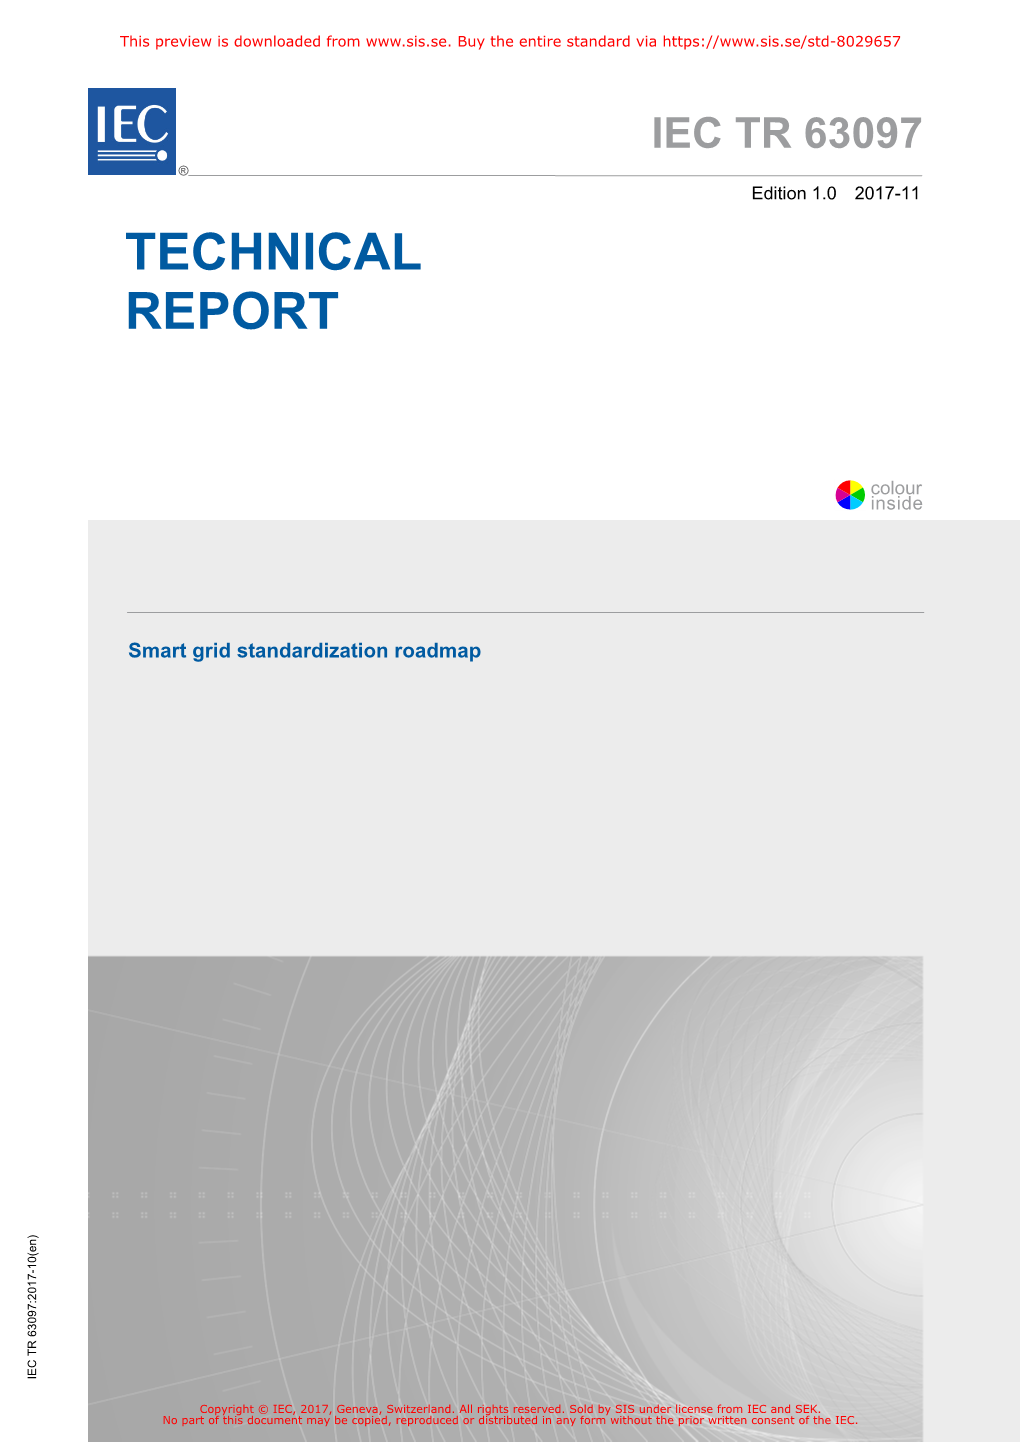 IEC TR 63097 ® Edition 1.0 2017-11 TECHNICAL REPORT